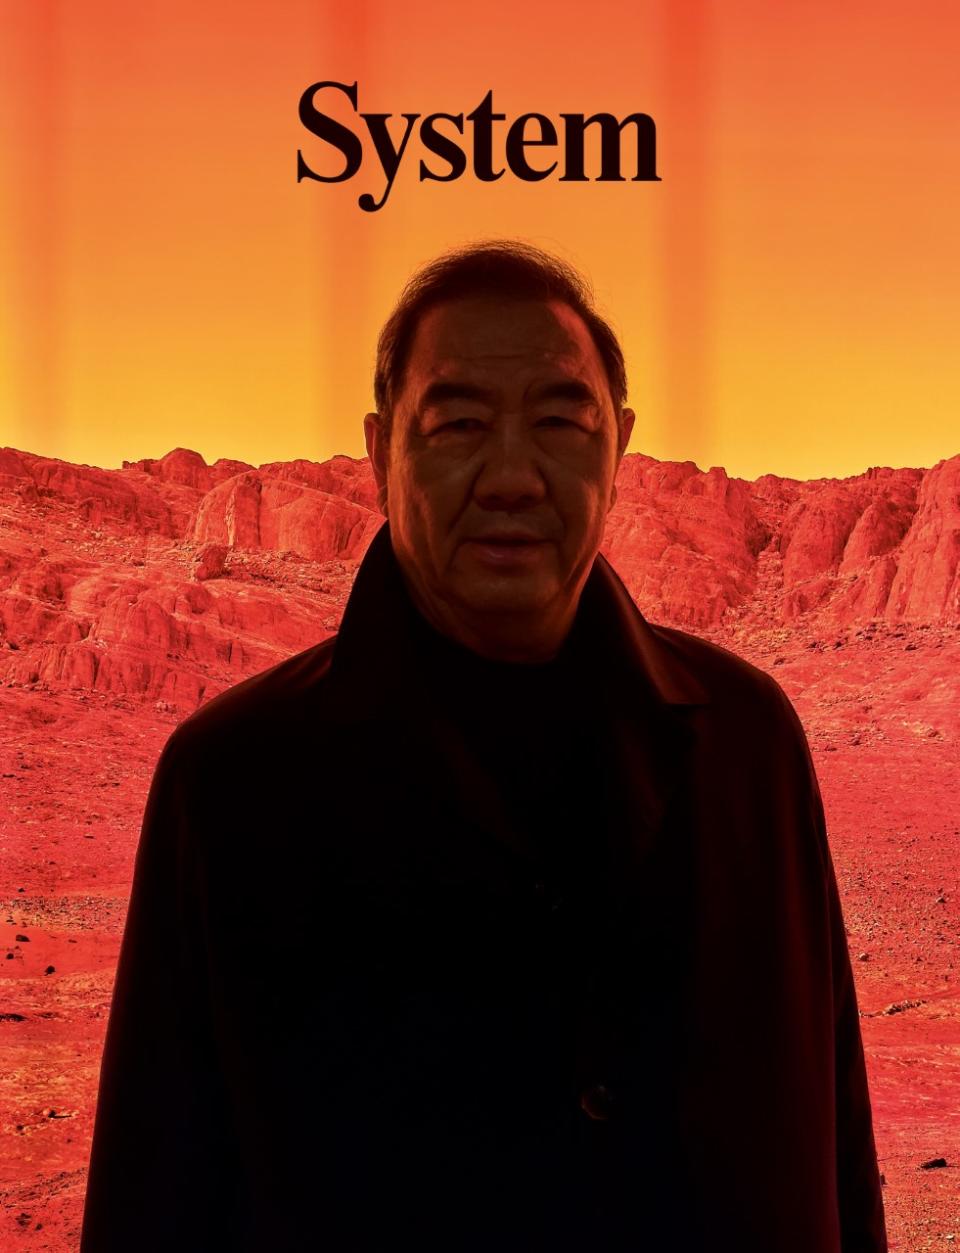 Mr. Ji on the cover of the next issue of System. - Credit: Juergen Teller